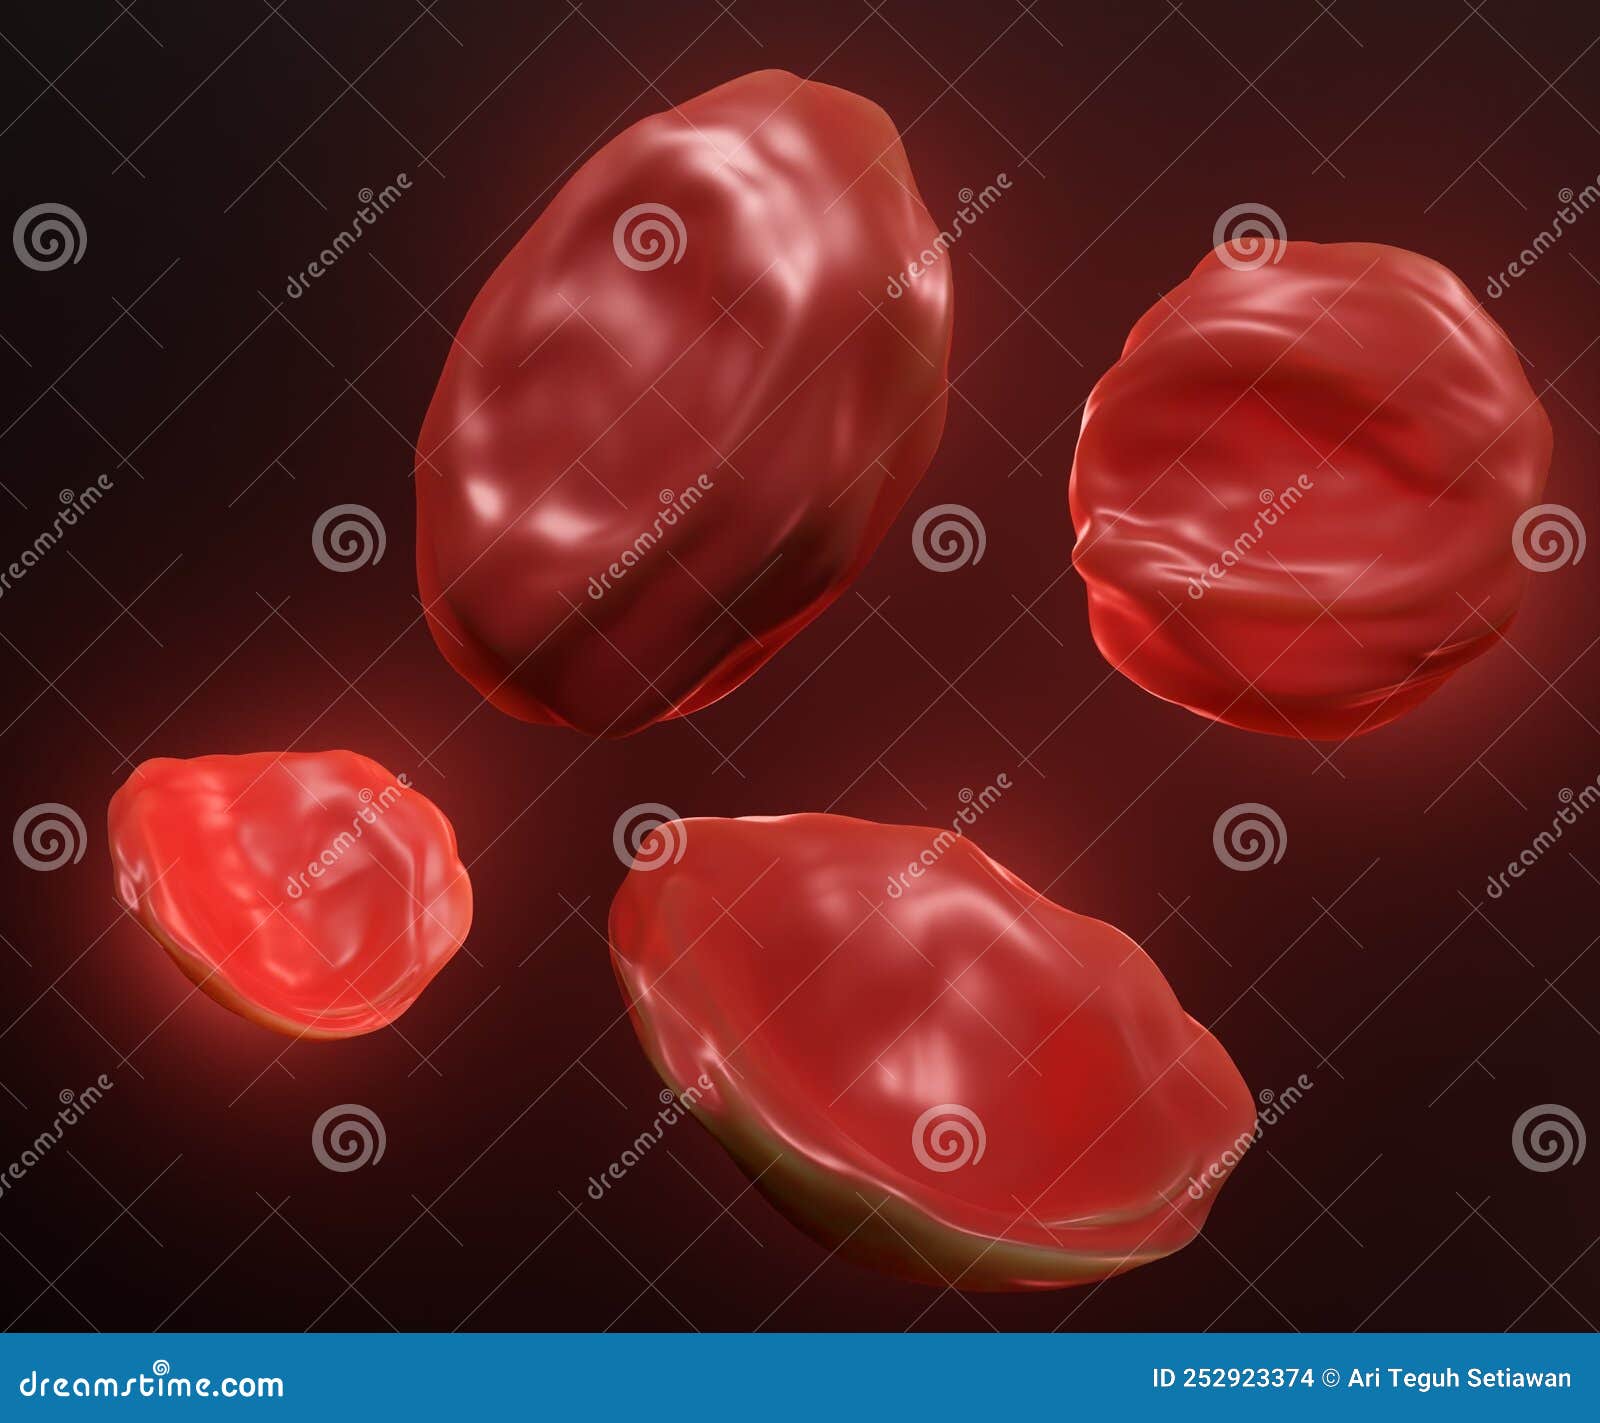 red blood cells are in a hypertonic solution